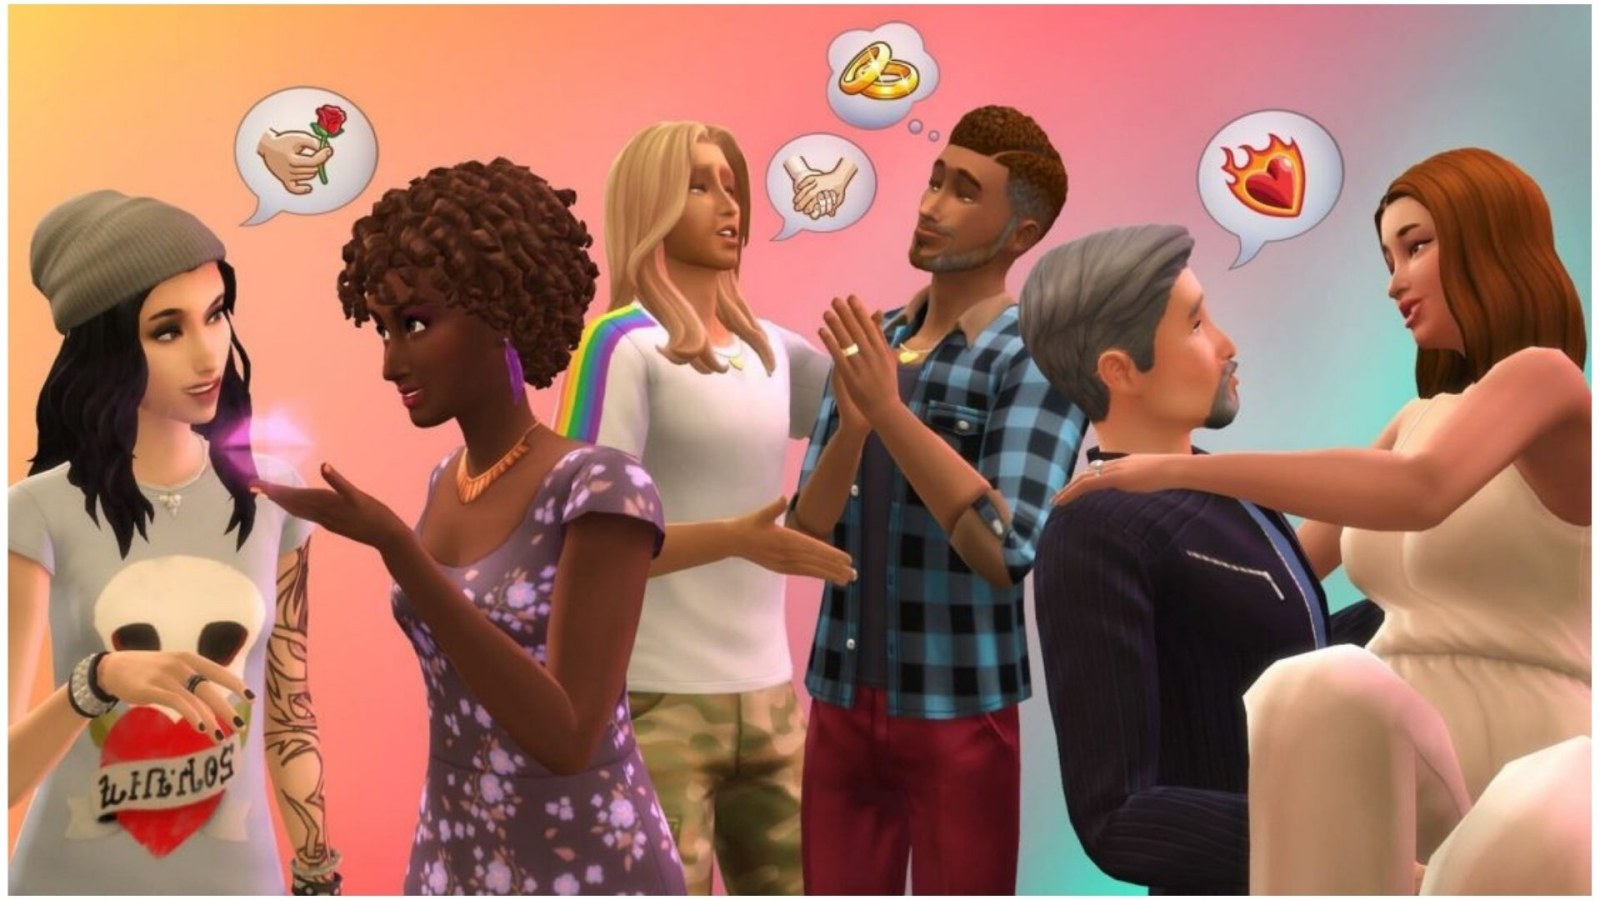 The Sims 4 relationship cheats: Max out friendship, romance, pets & more